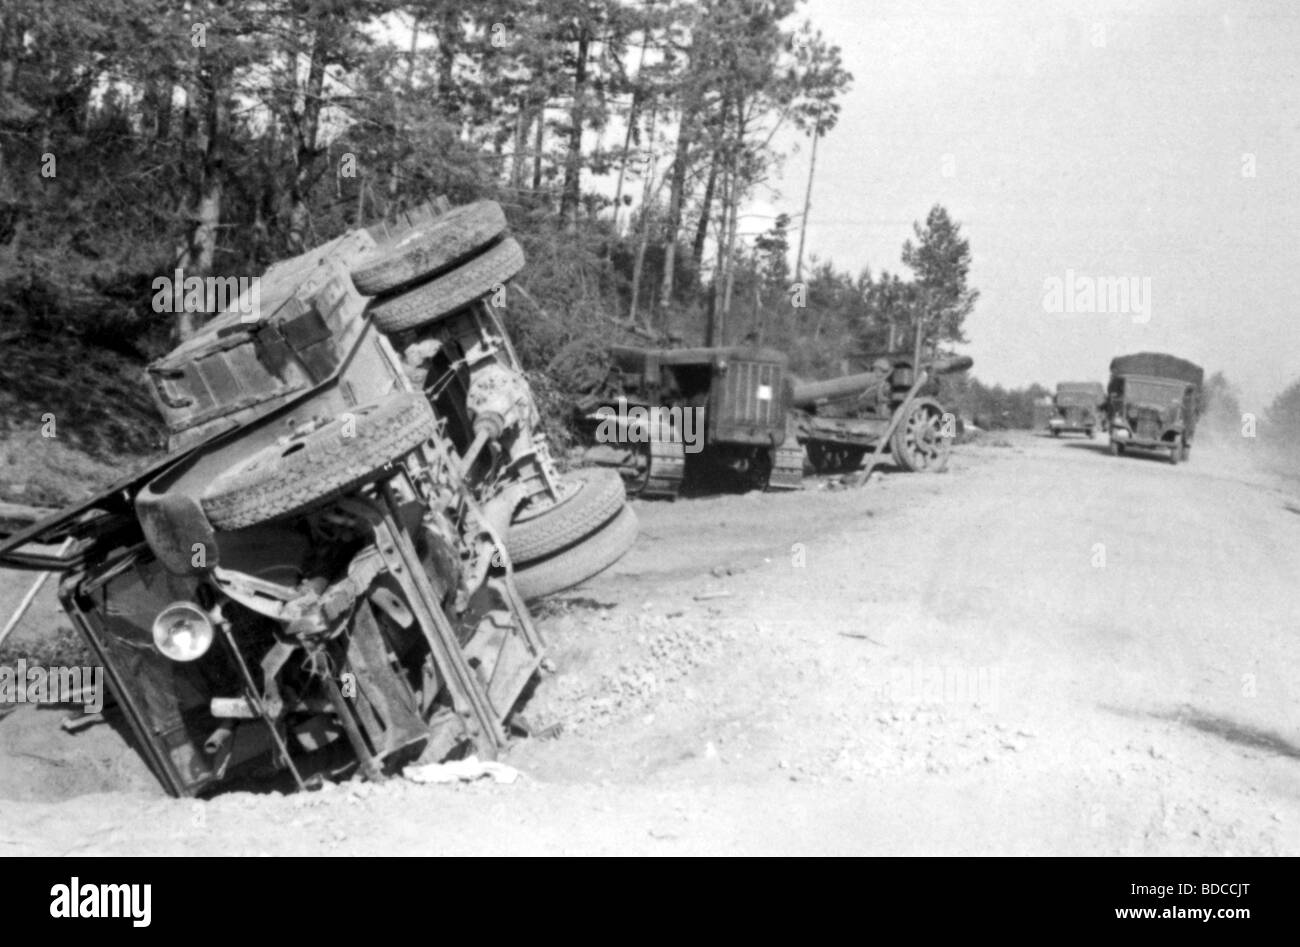 events, Second World War / WWII, Russia 1941, Soviet column after German air raid between Bialystok and Vaukavysk, July 1941, destroyed vehicles and 152 mm howitzer-gun, Stock Photo